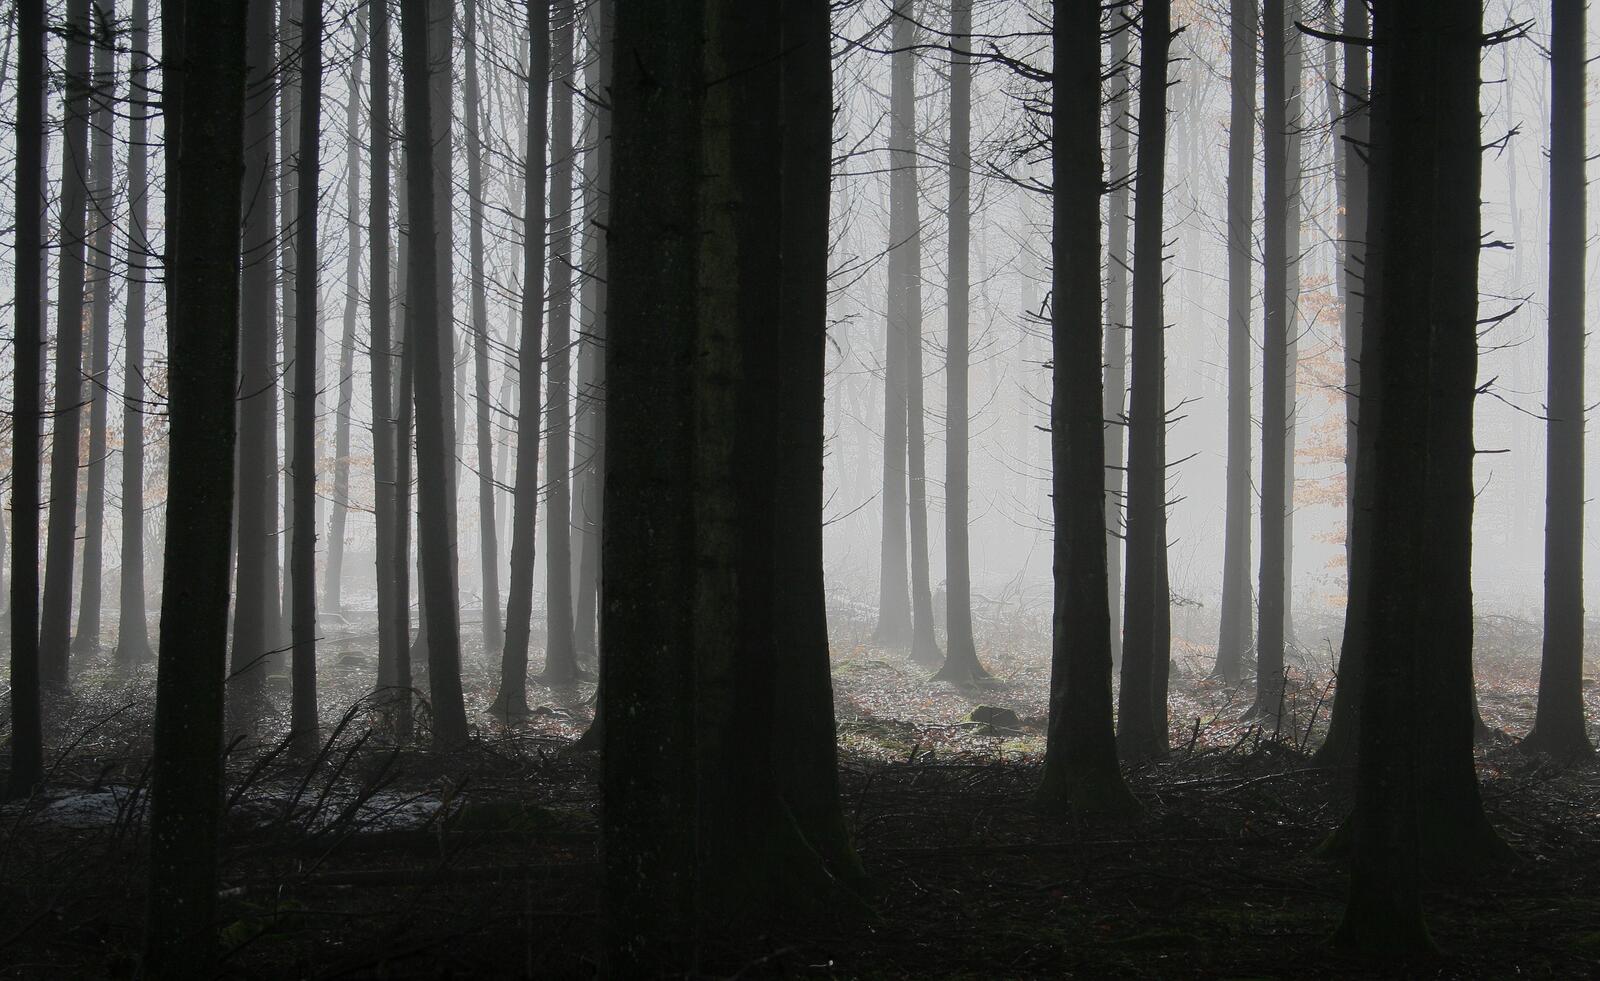 Free photo Image with silhouette of tree trunks in a misty forest